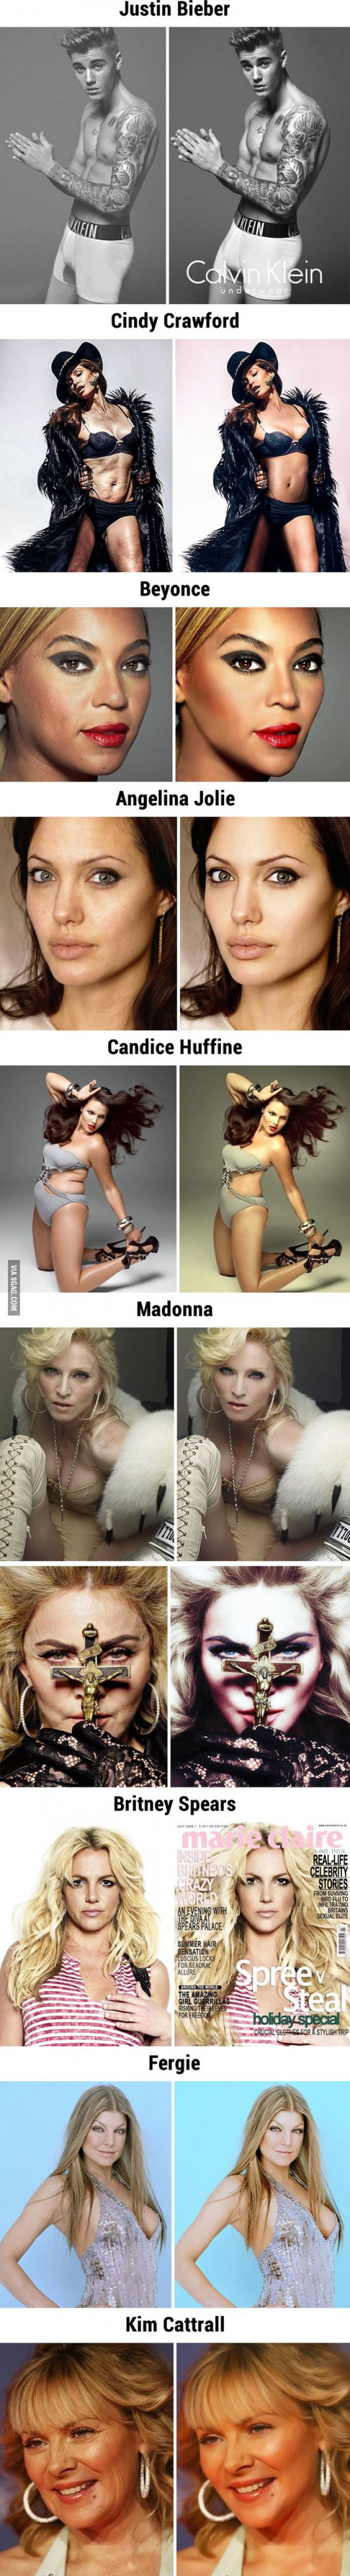 10 Celebrities Before And After Photoshop